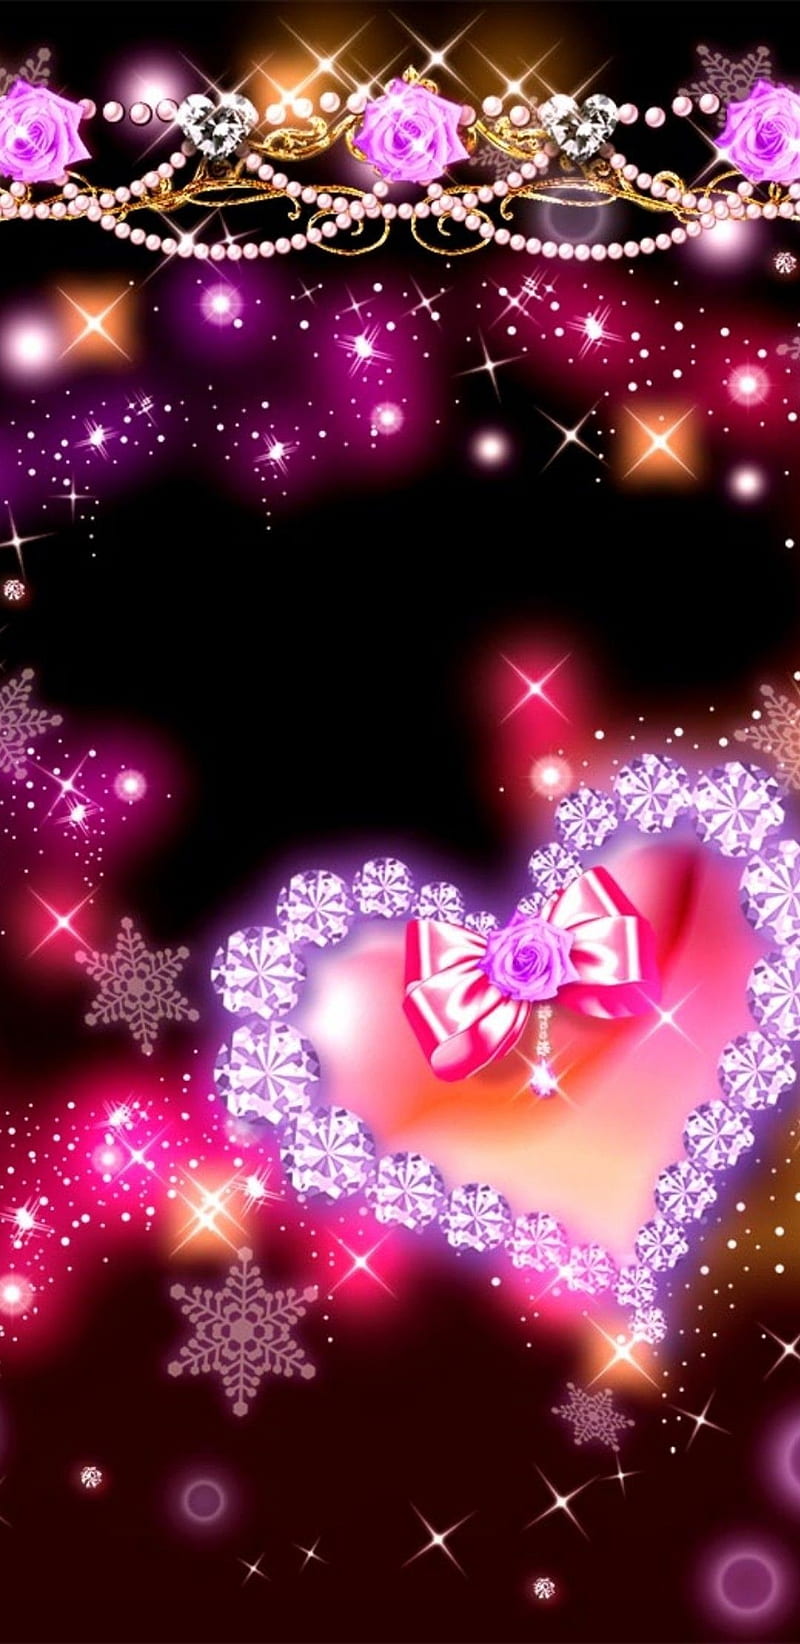 Cute Heart Wallpaper 66 pictures